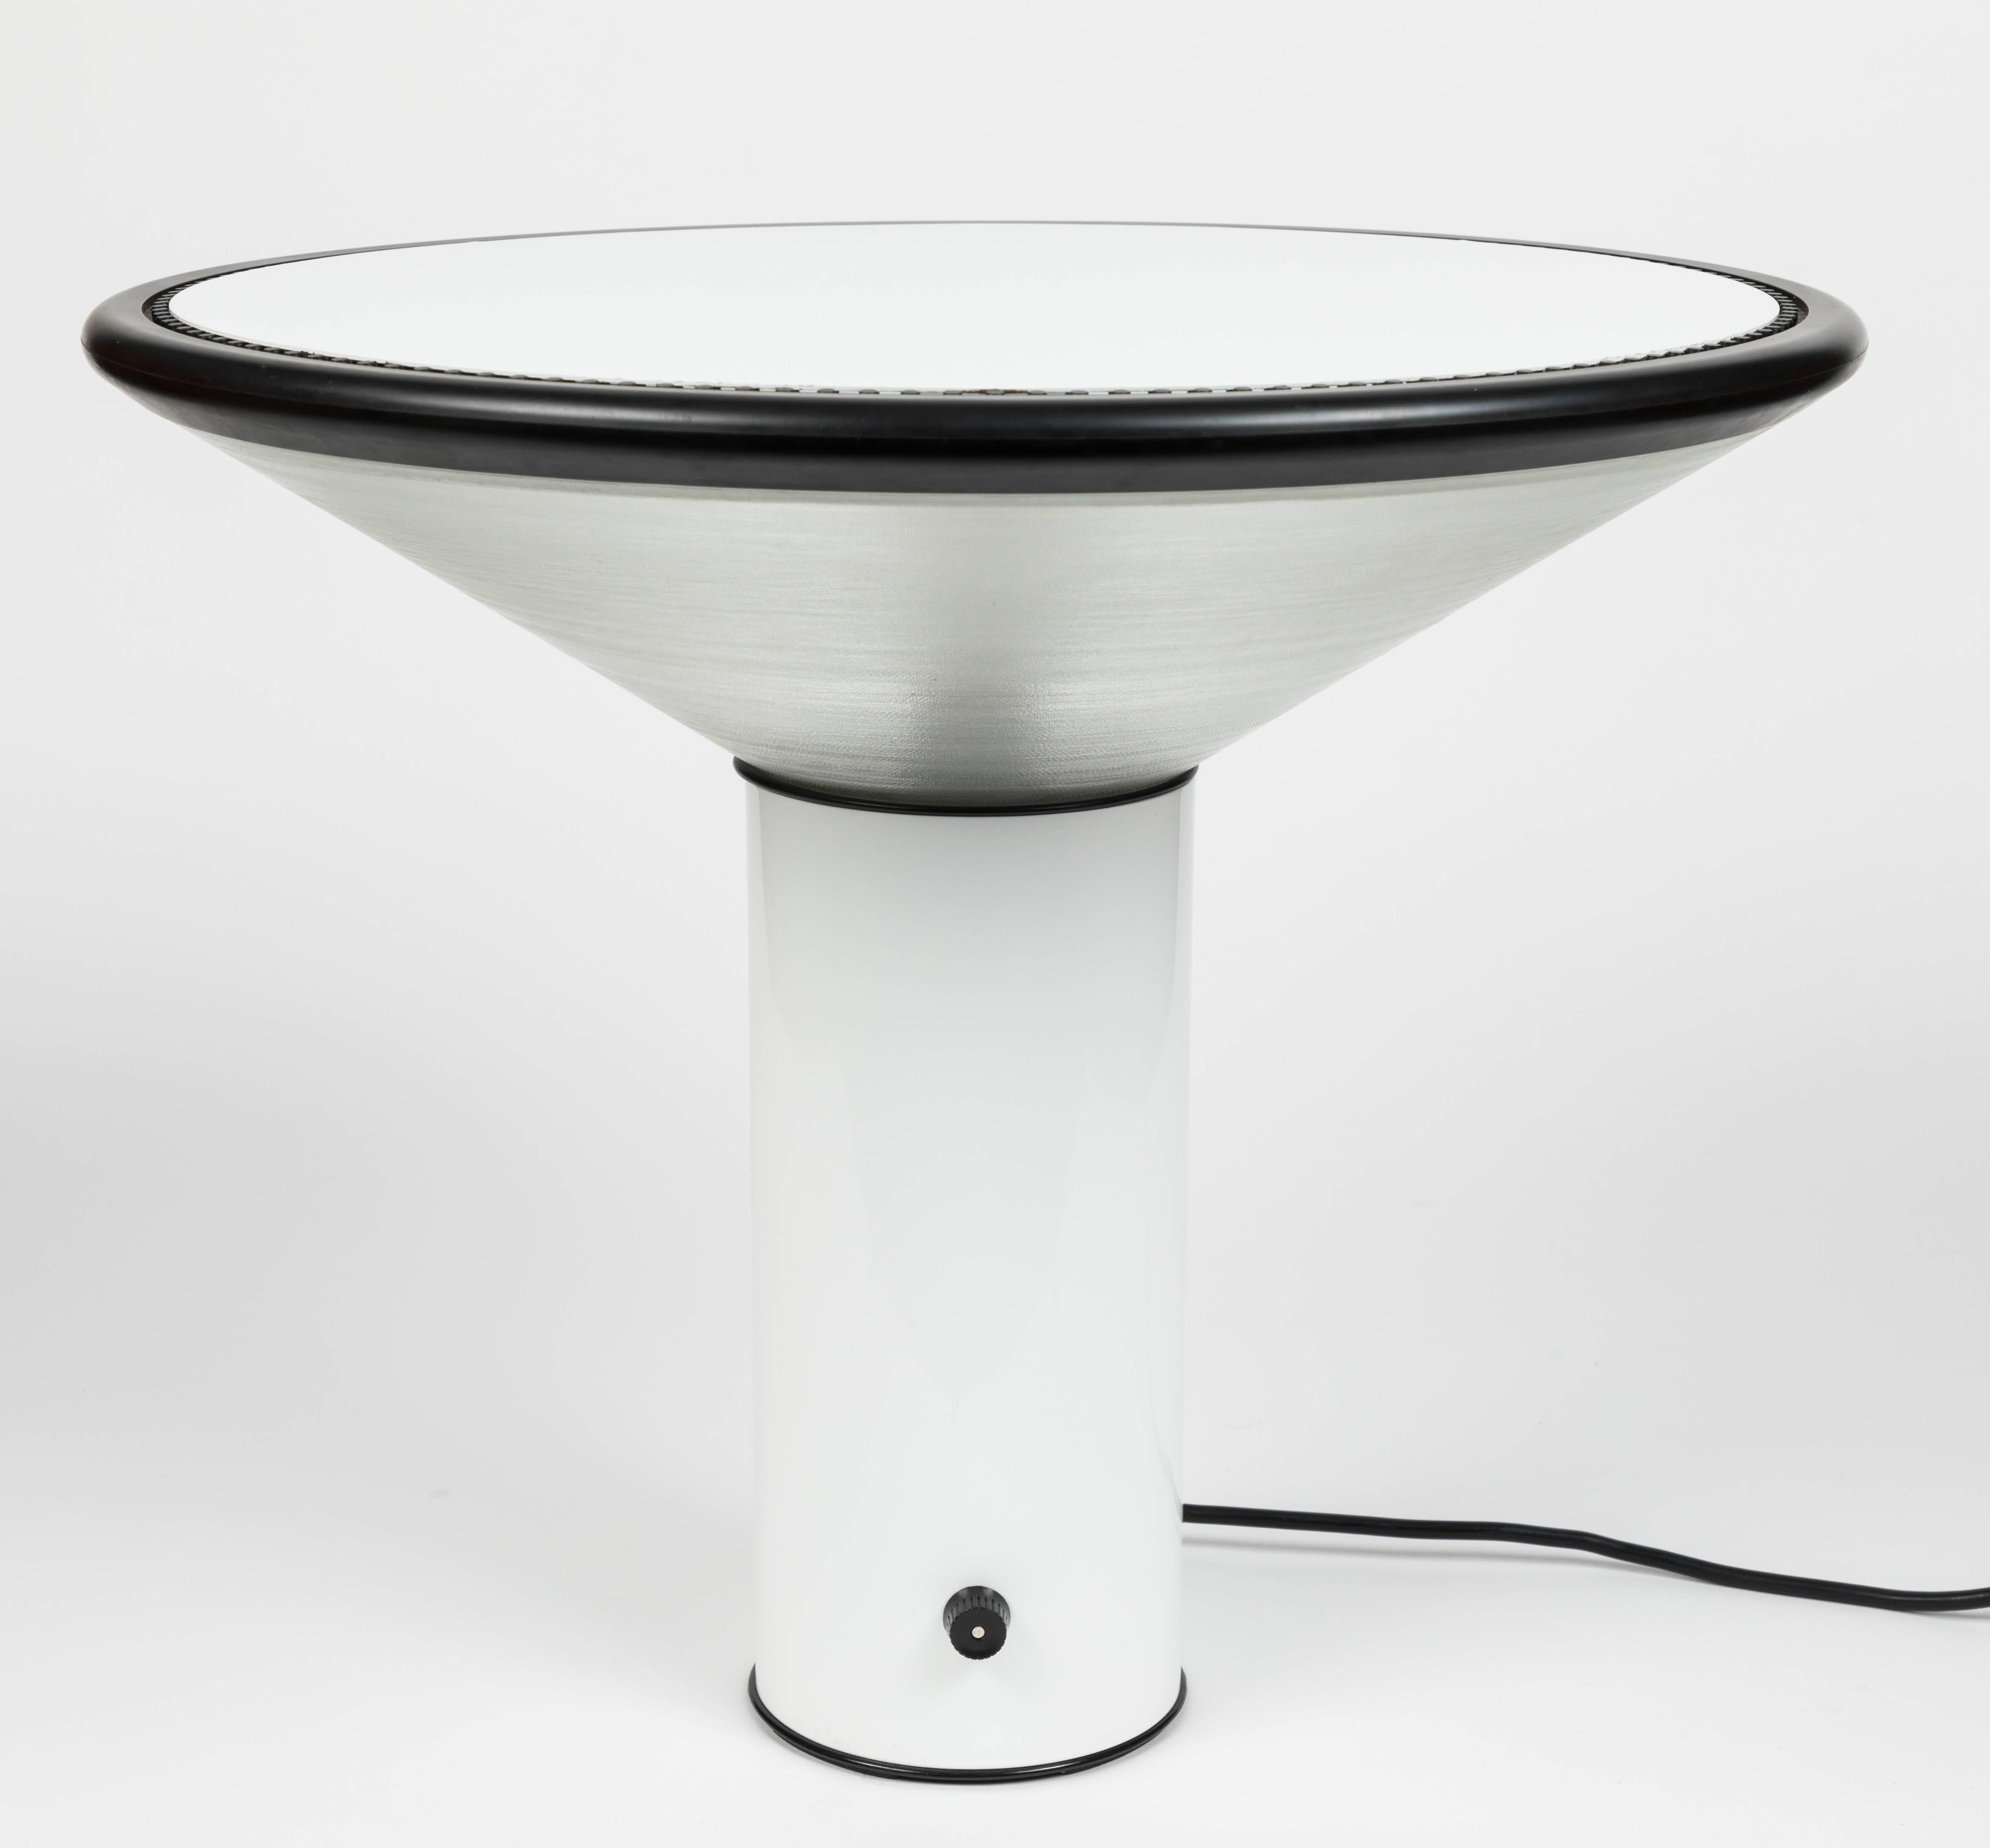 Large Gianfranco Frattini 'NOA' Table Lamp for LUCI, circa 1980 a highly refined and architectural design executed in white enameled metal, black rubber and thick pressed glass. Professionally rewired for standard medium base e27 100 watt max bulb.